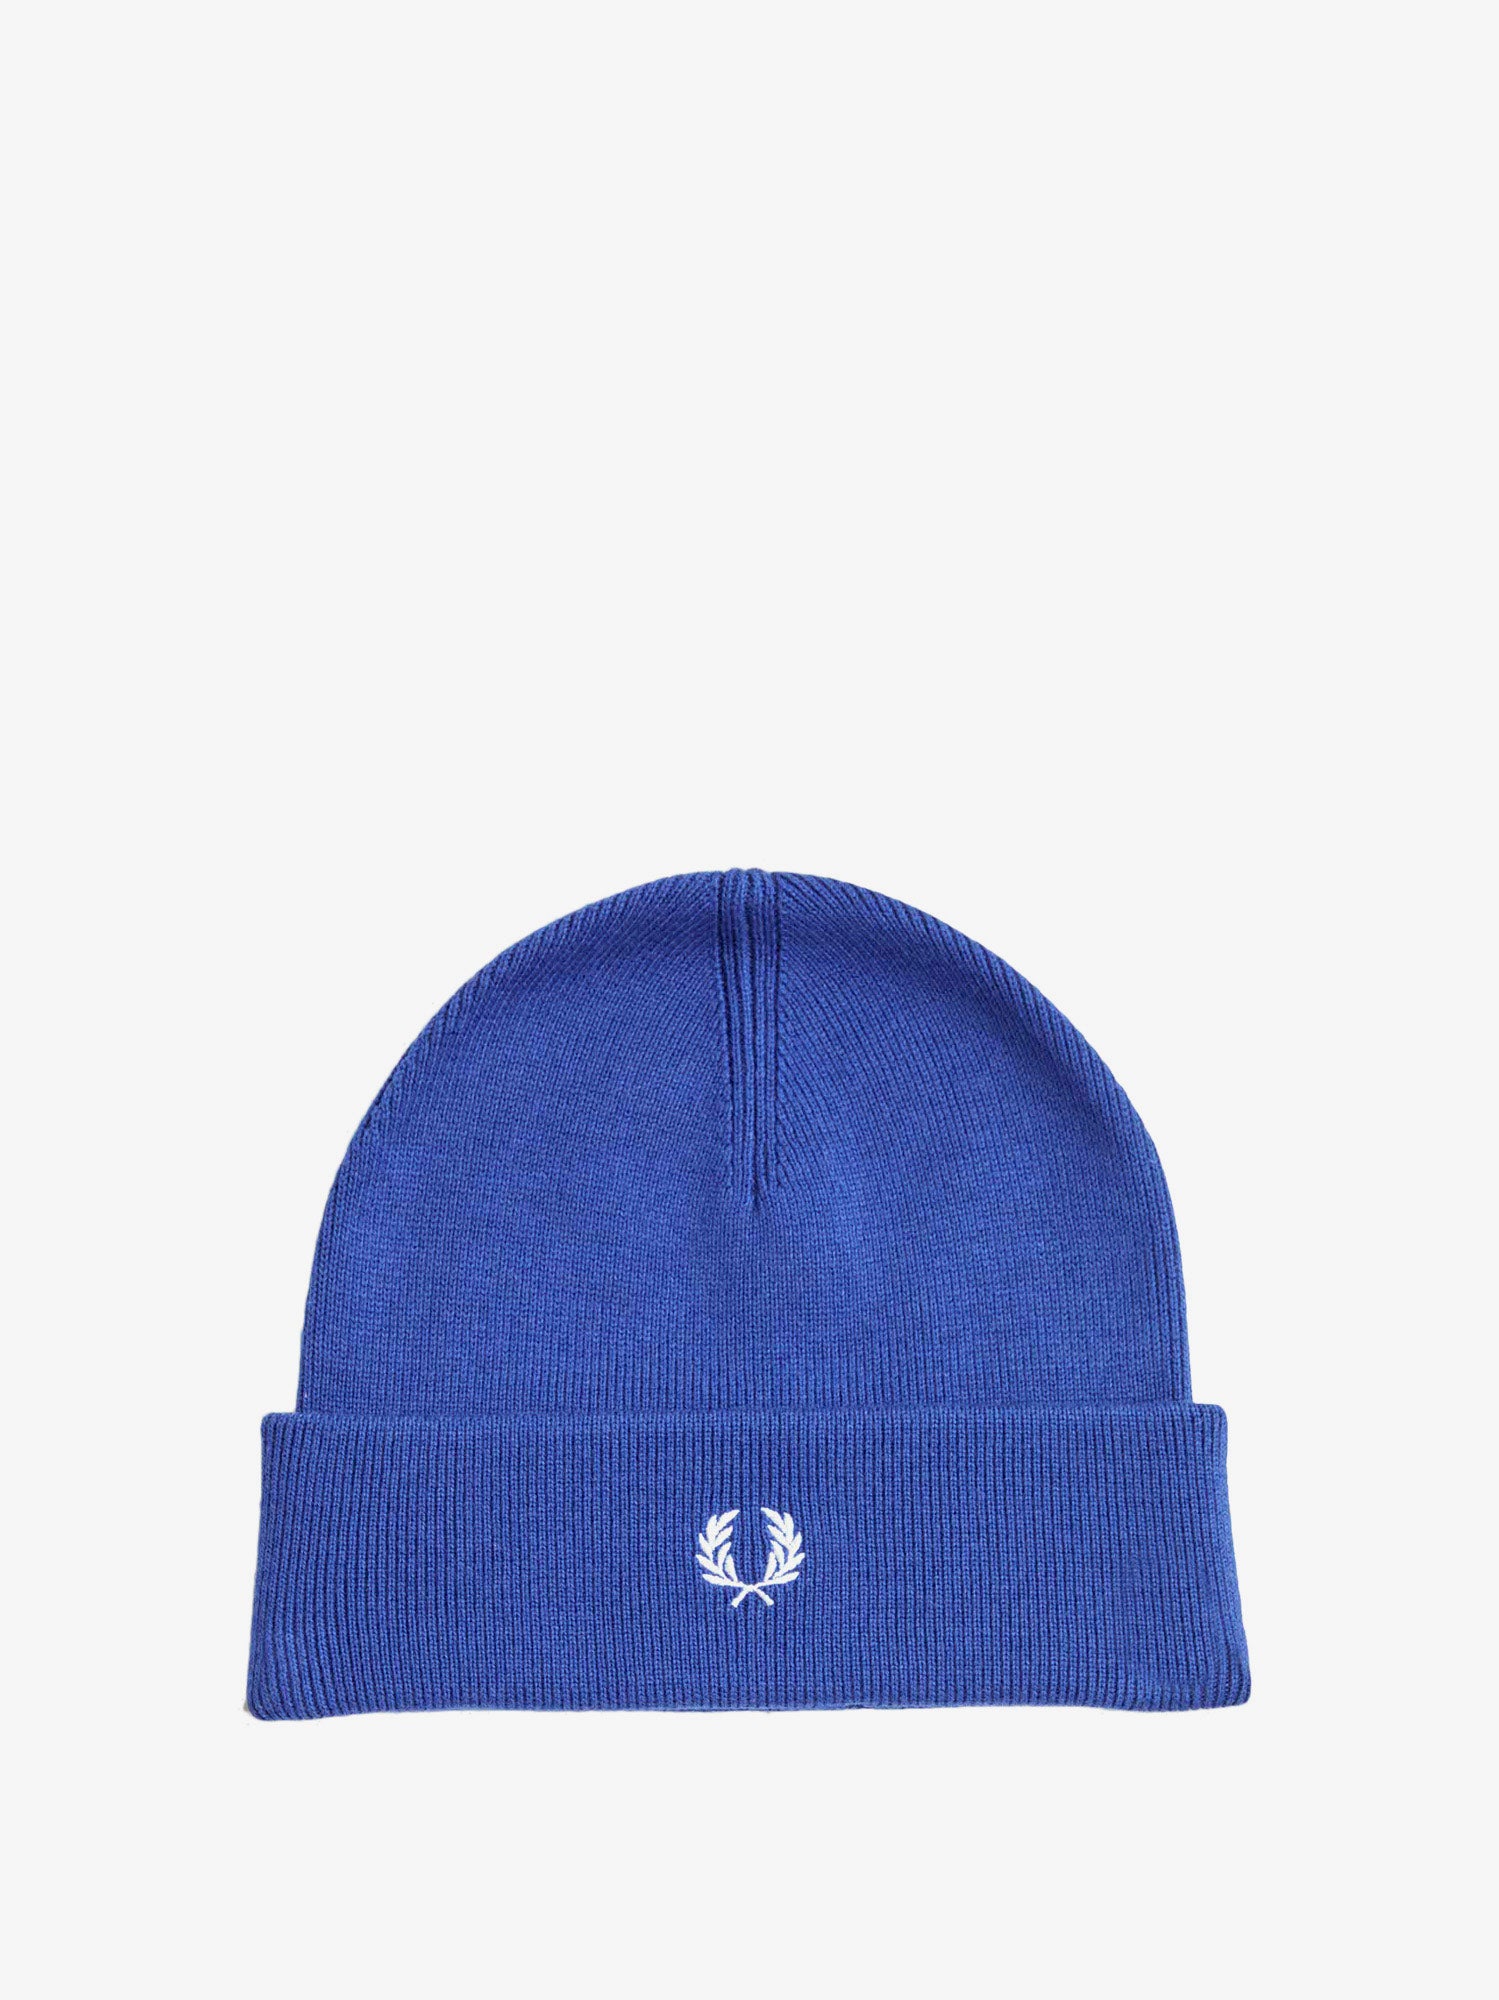 fred perry hat - man